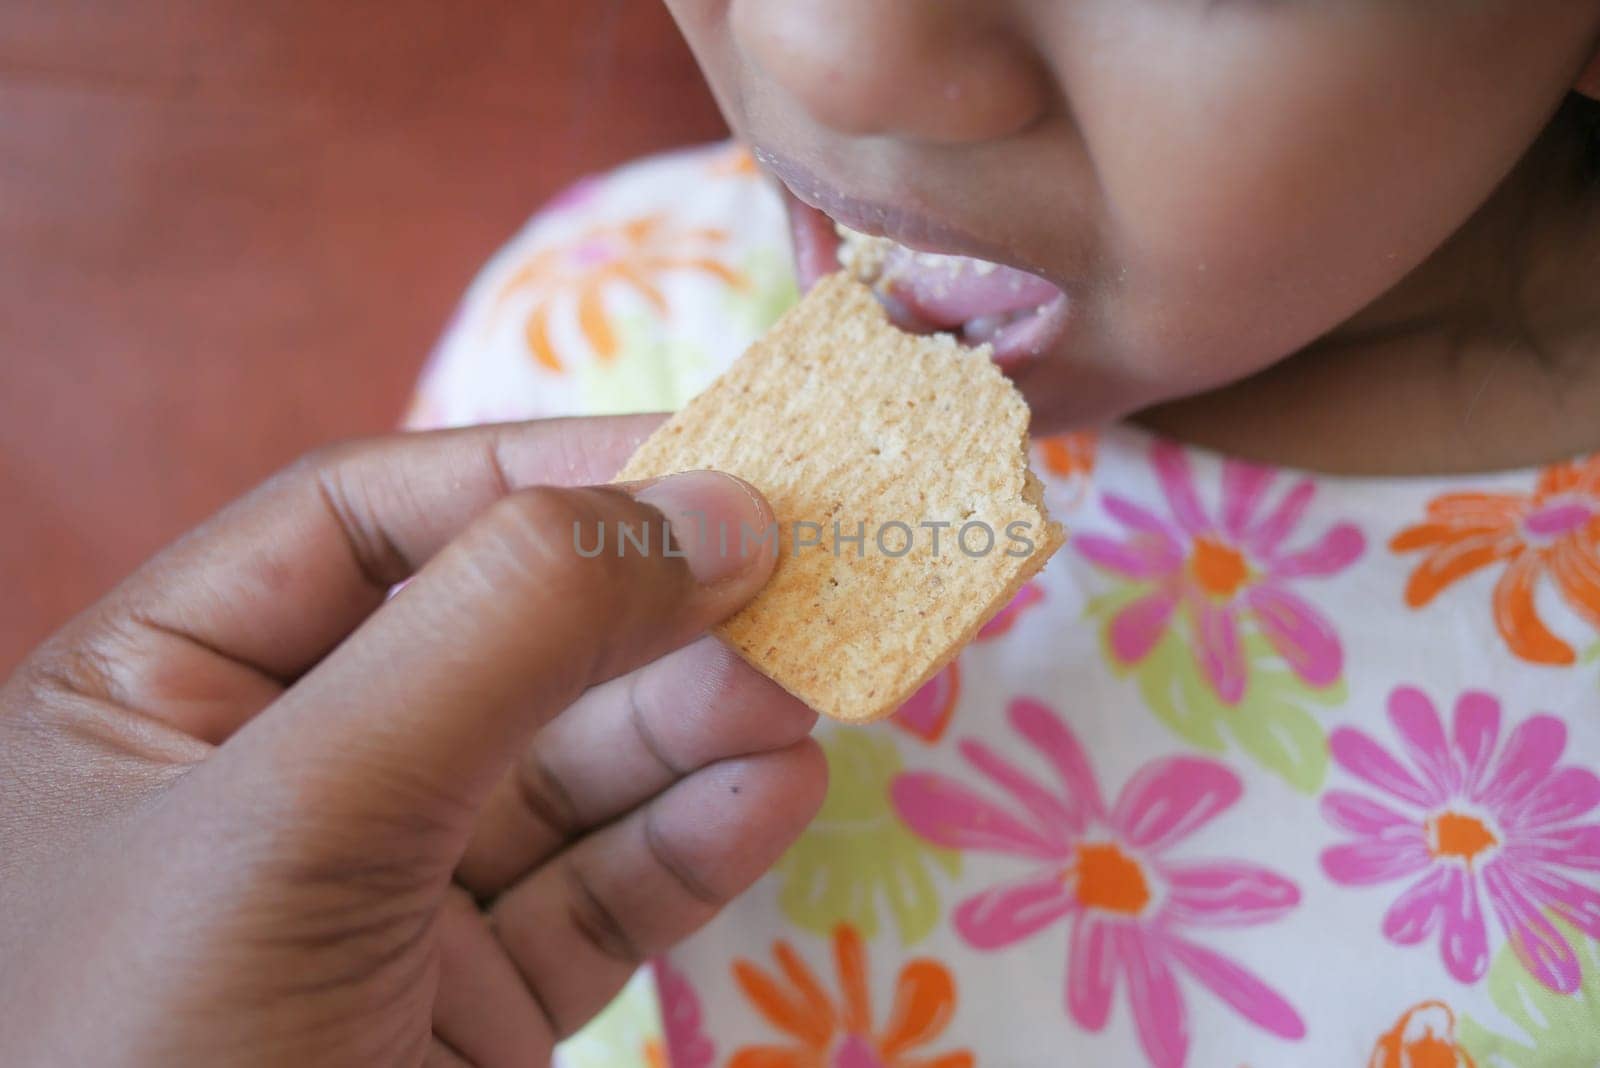 child mouth eating potato chips by towfiq007